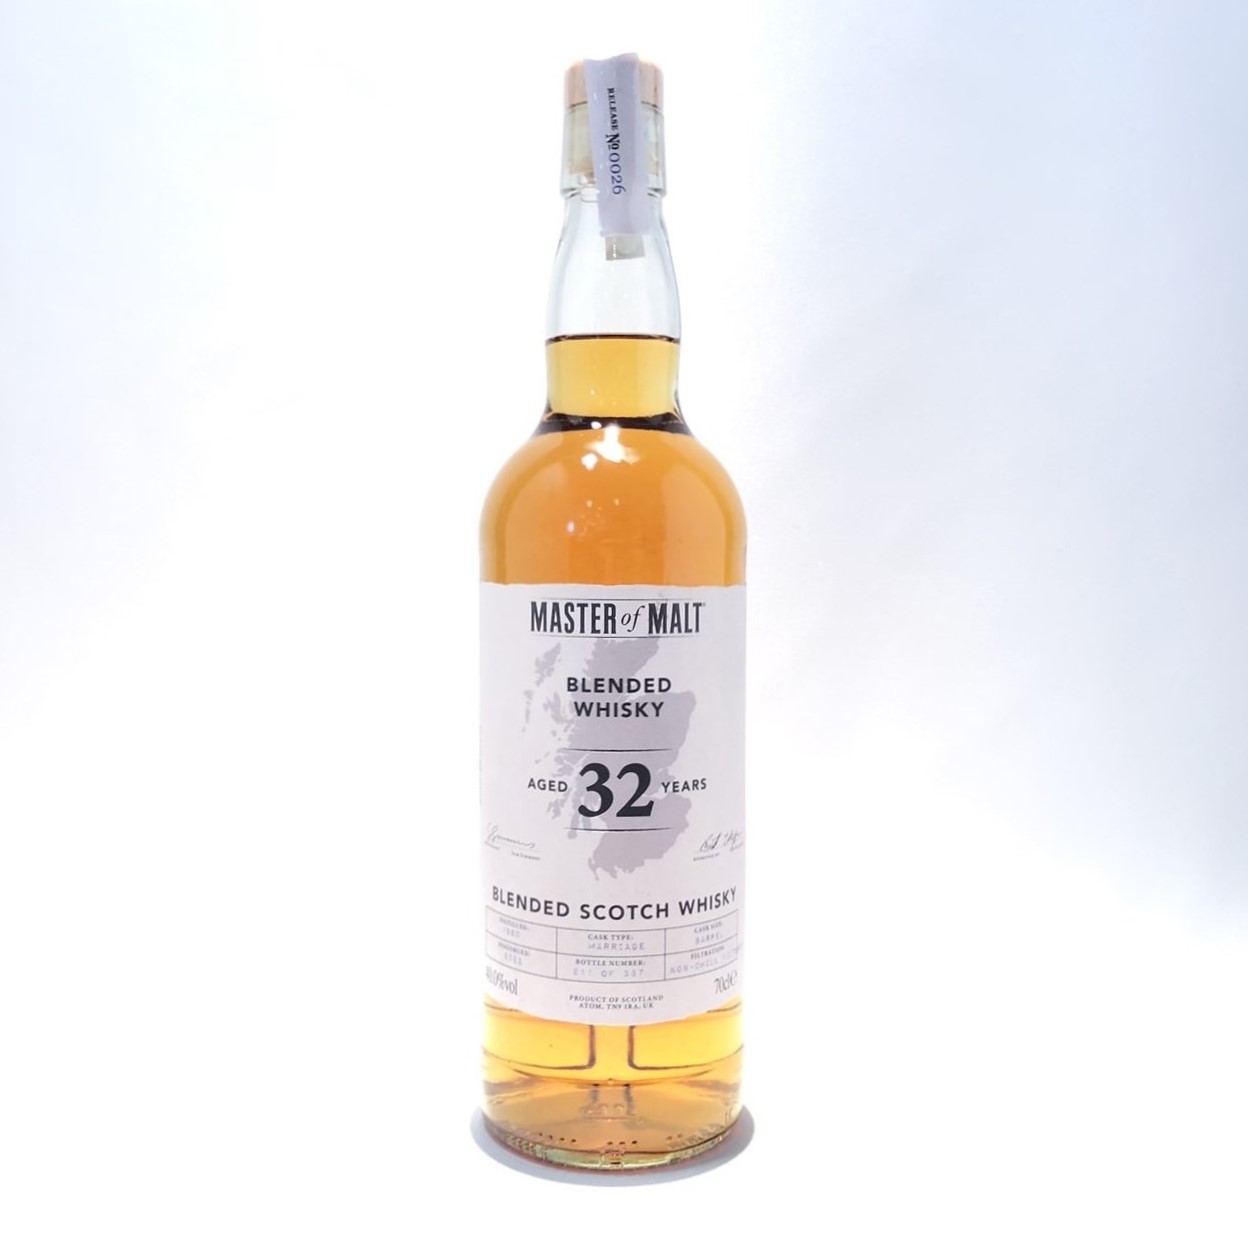 }X^[ Iu guhEBXL[ 32Ni1990-2022jMASTER OF MALTBLENDED WHISKYAGED 32 YEARS[XNo002670cl ^ 40.0 % vol